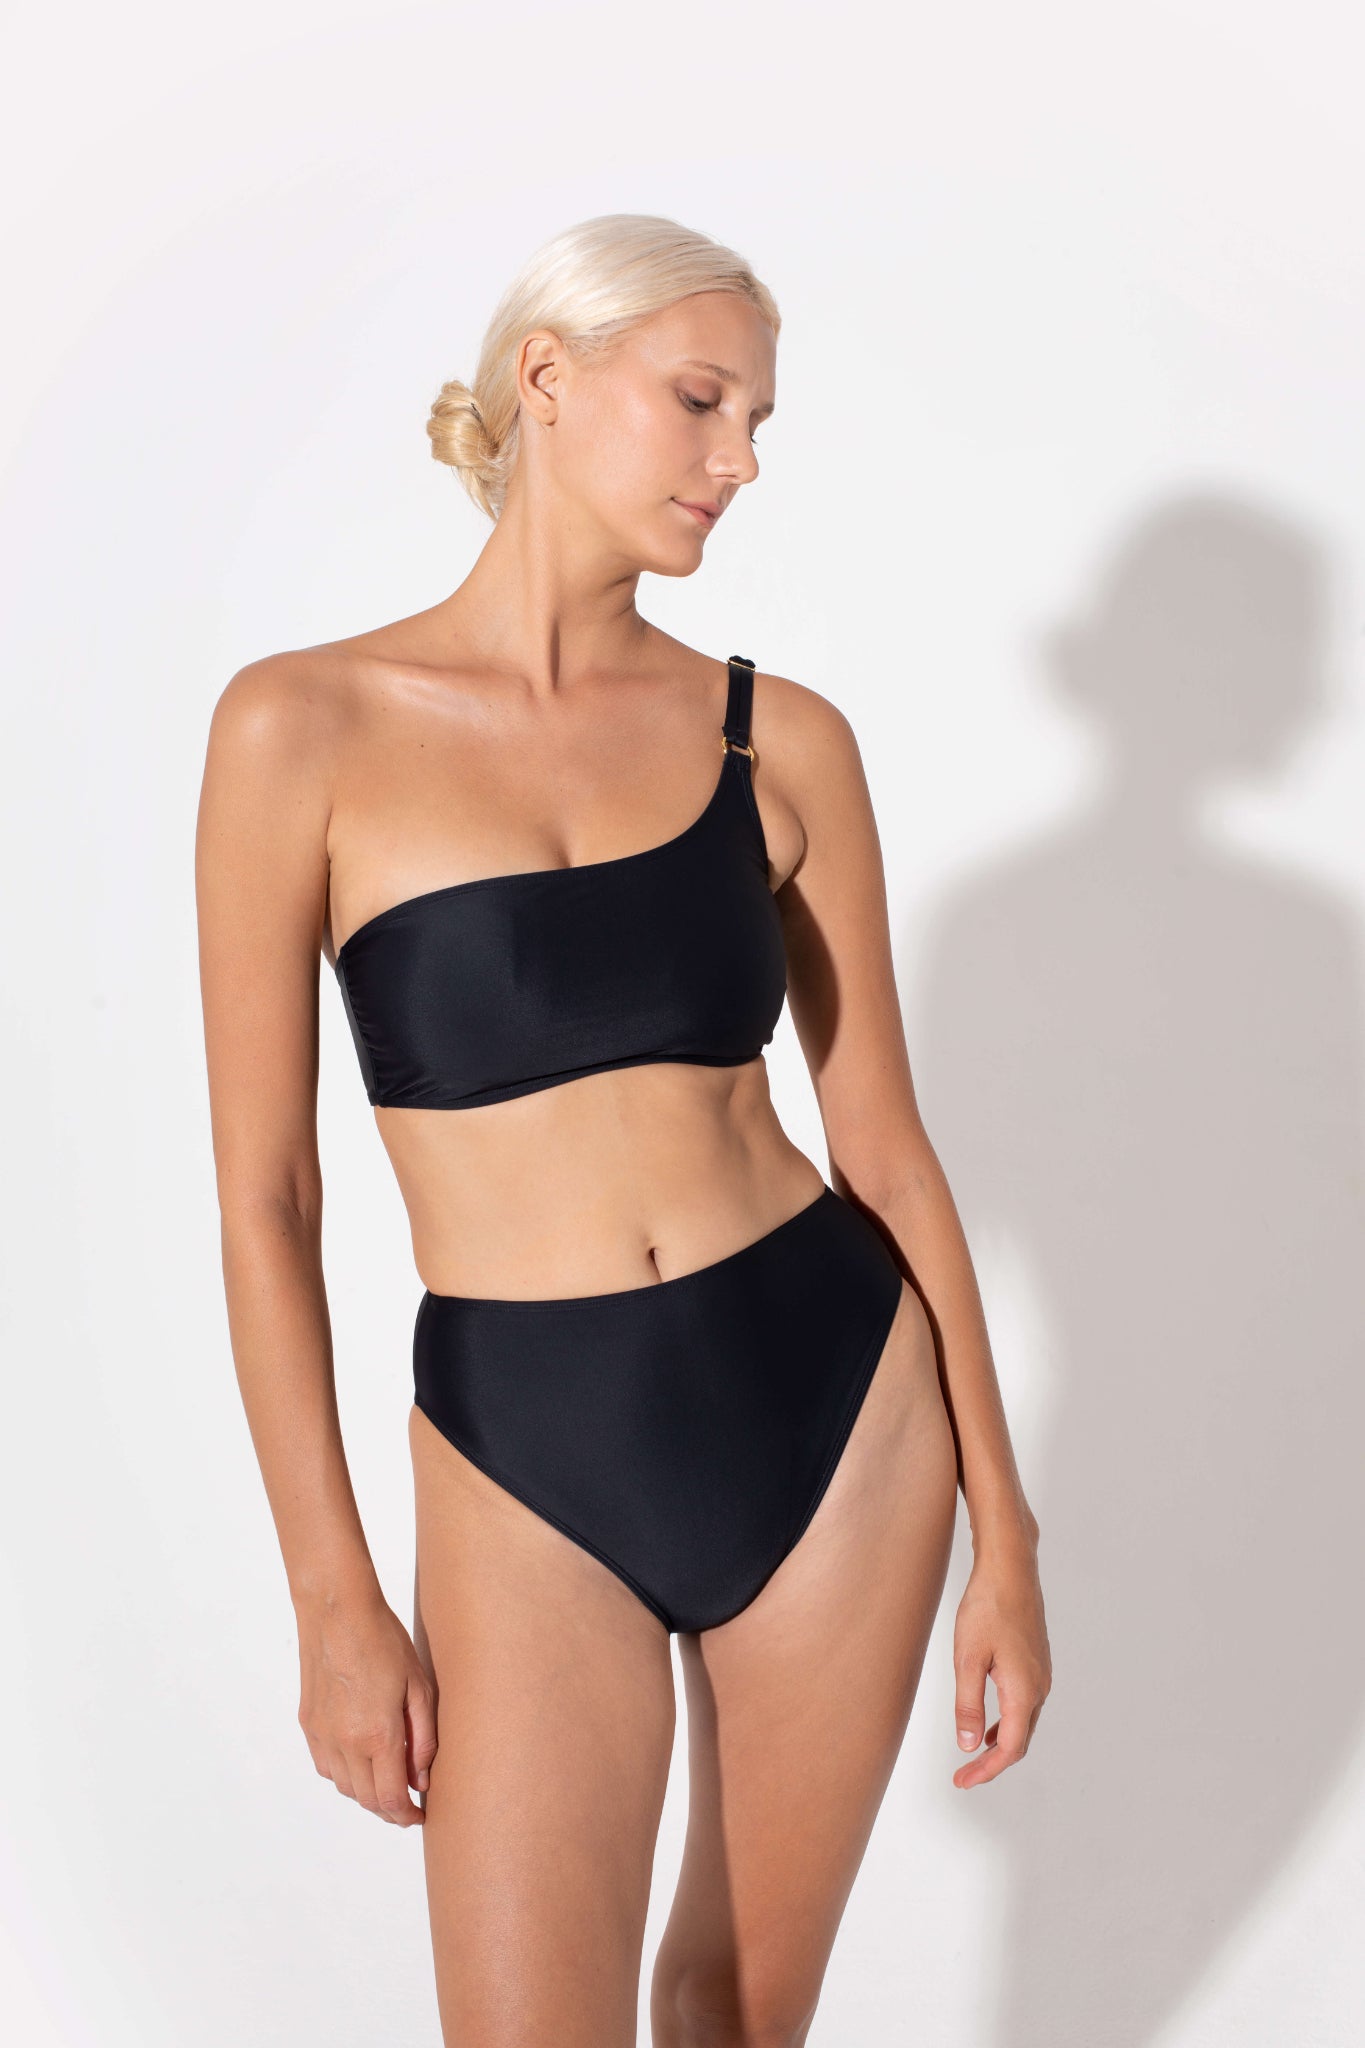 Koraru swimwear is easy to breastfeed with. Bandeau top in black color with easy to take off double strap